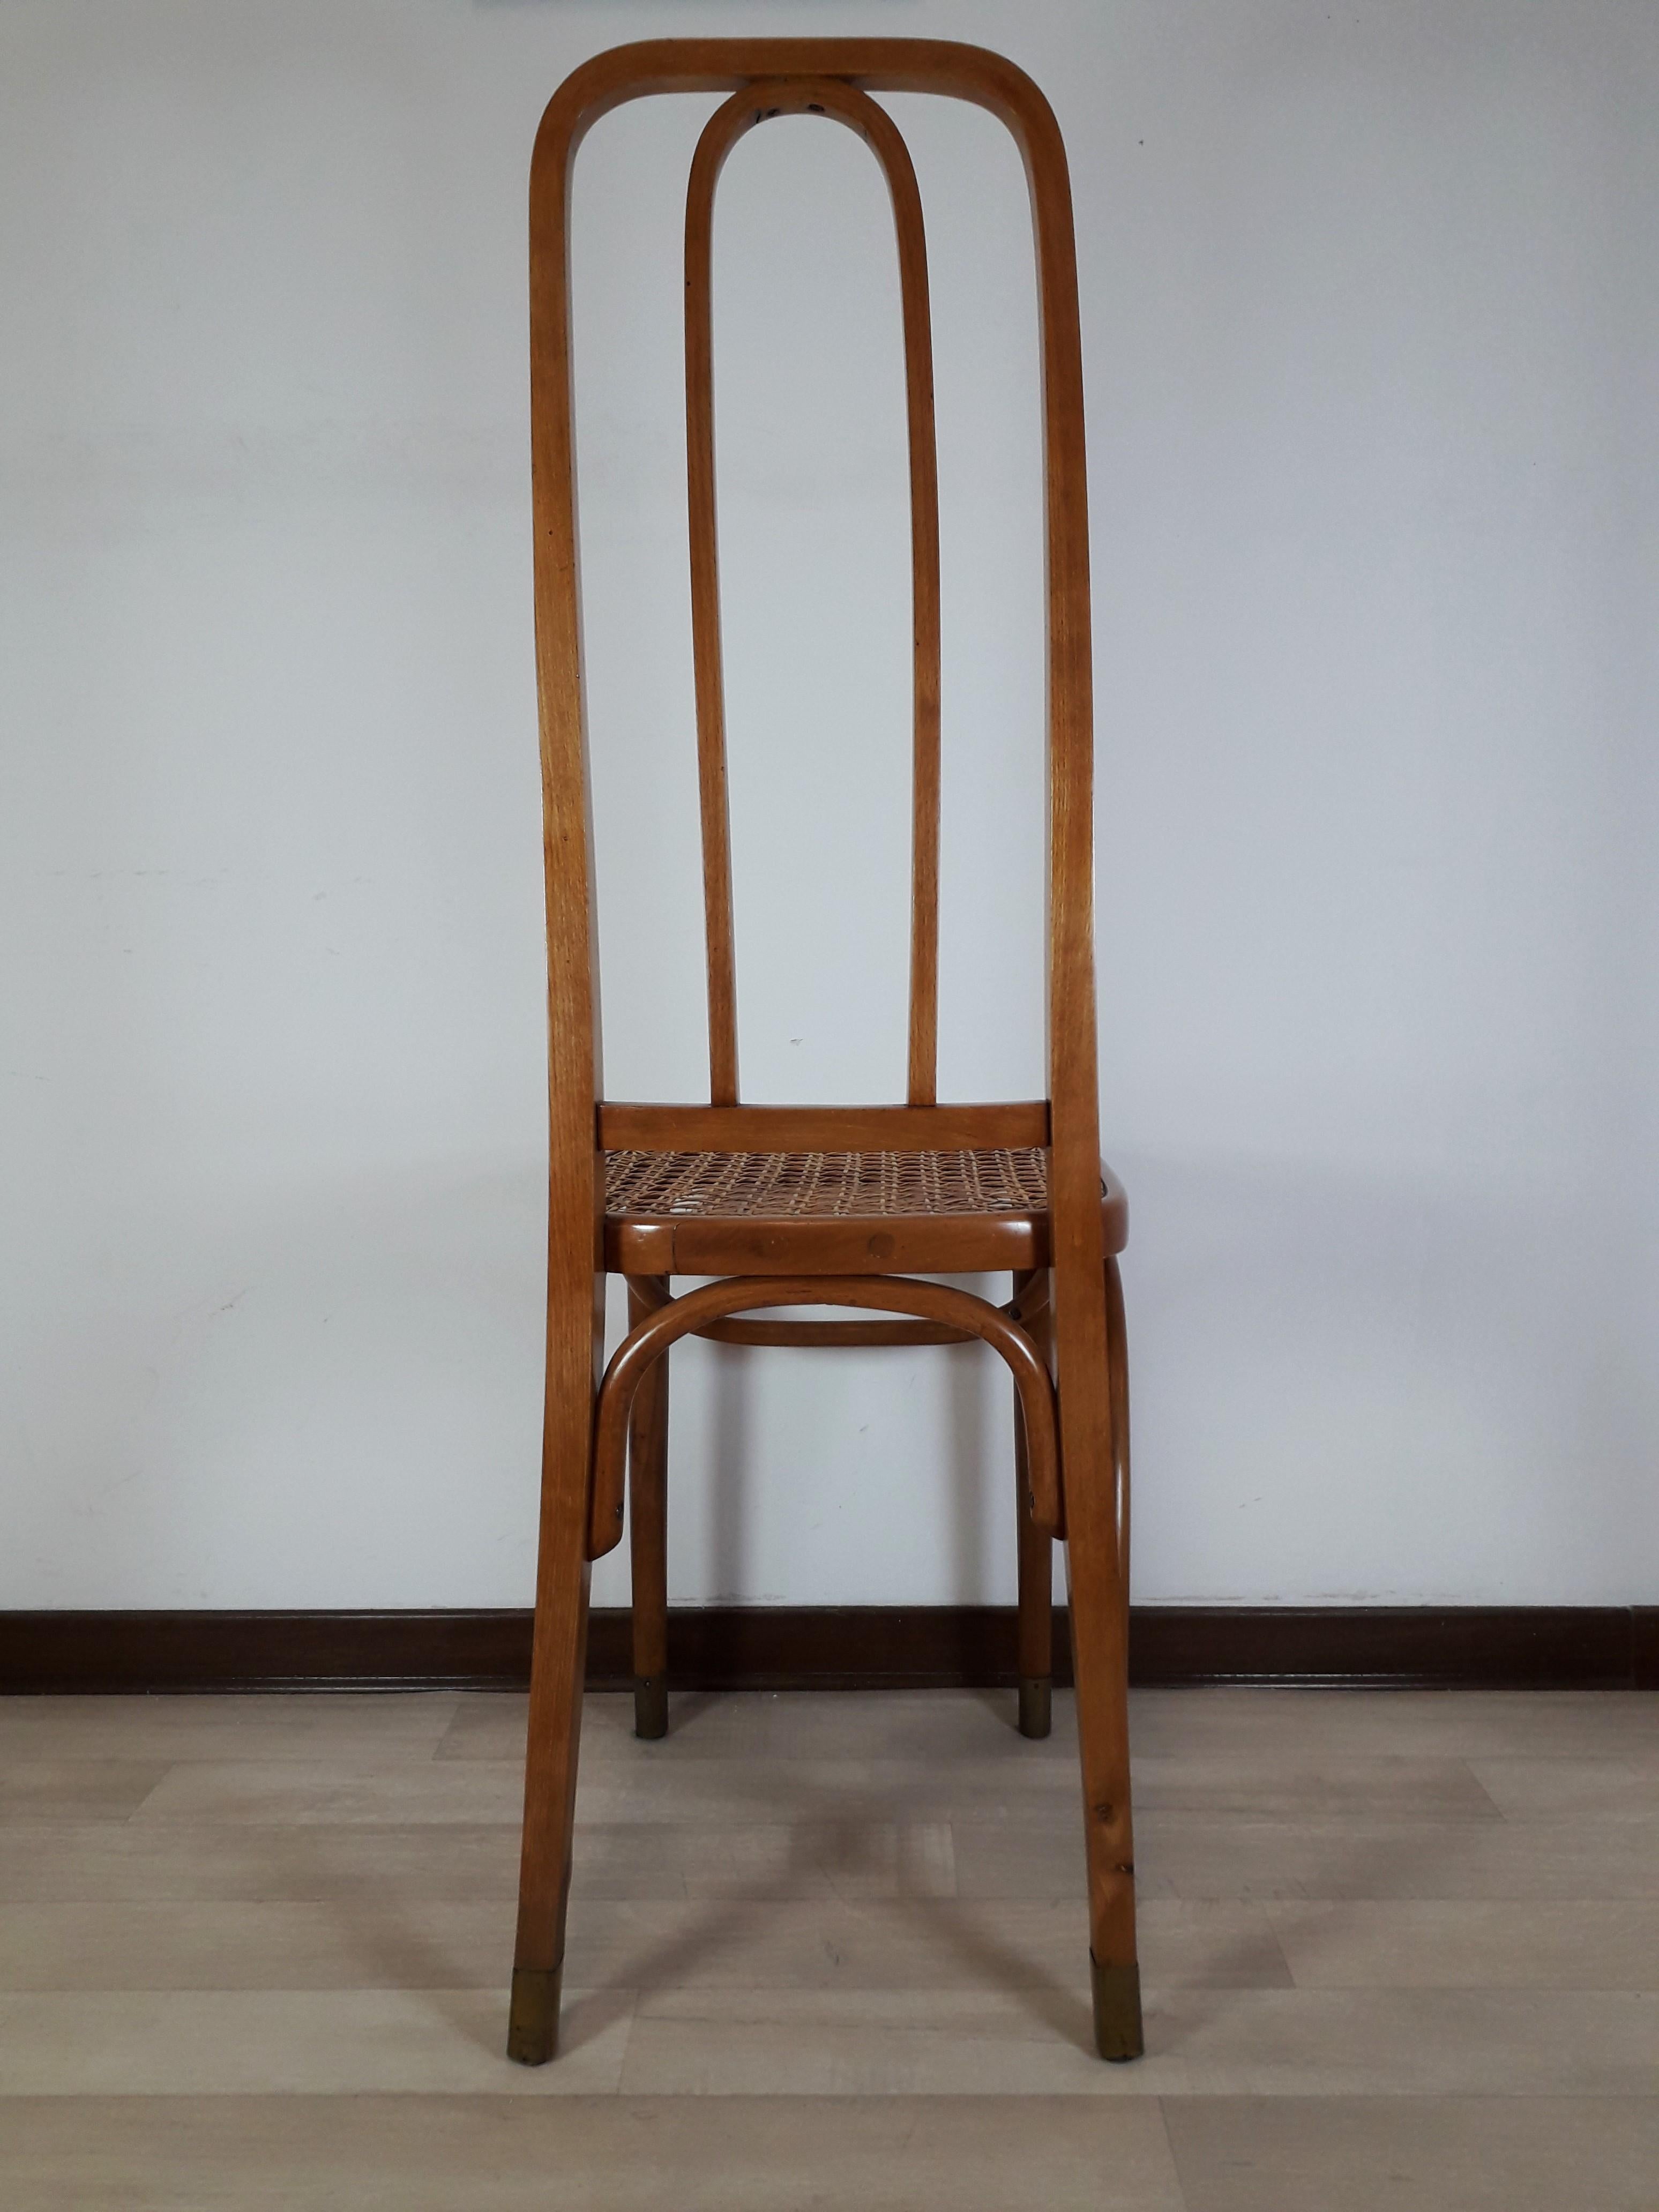 Wonder Chair N.°246 by Antonio Volpe, 1912 In Excellent Condition For Sale In Mariano Del Friuli, GO